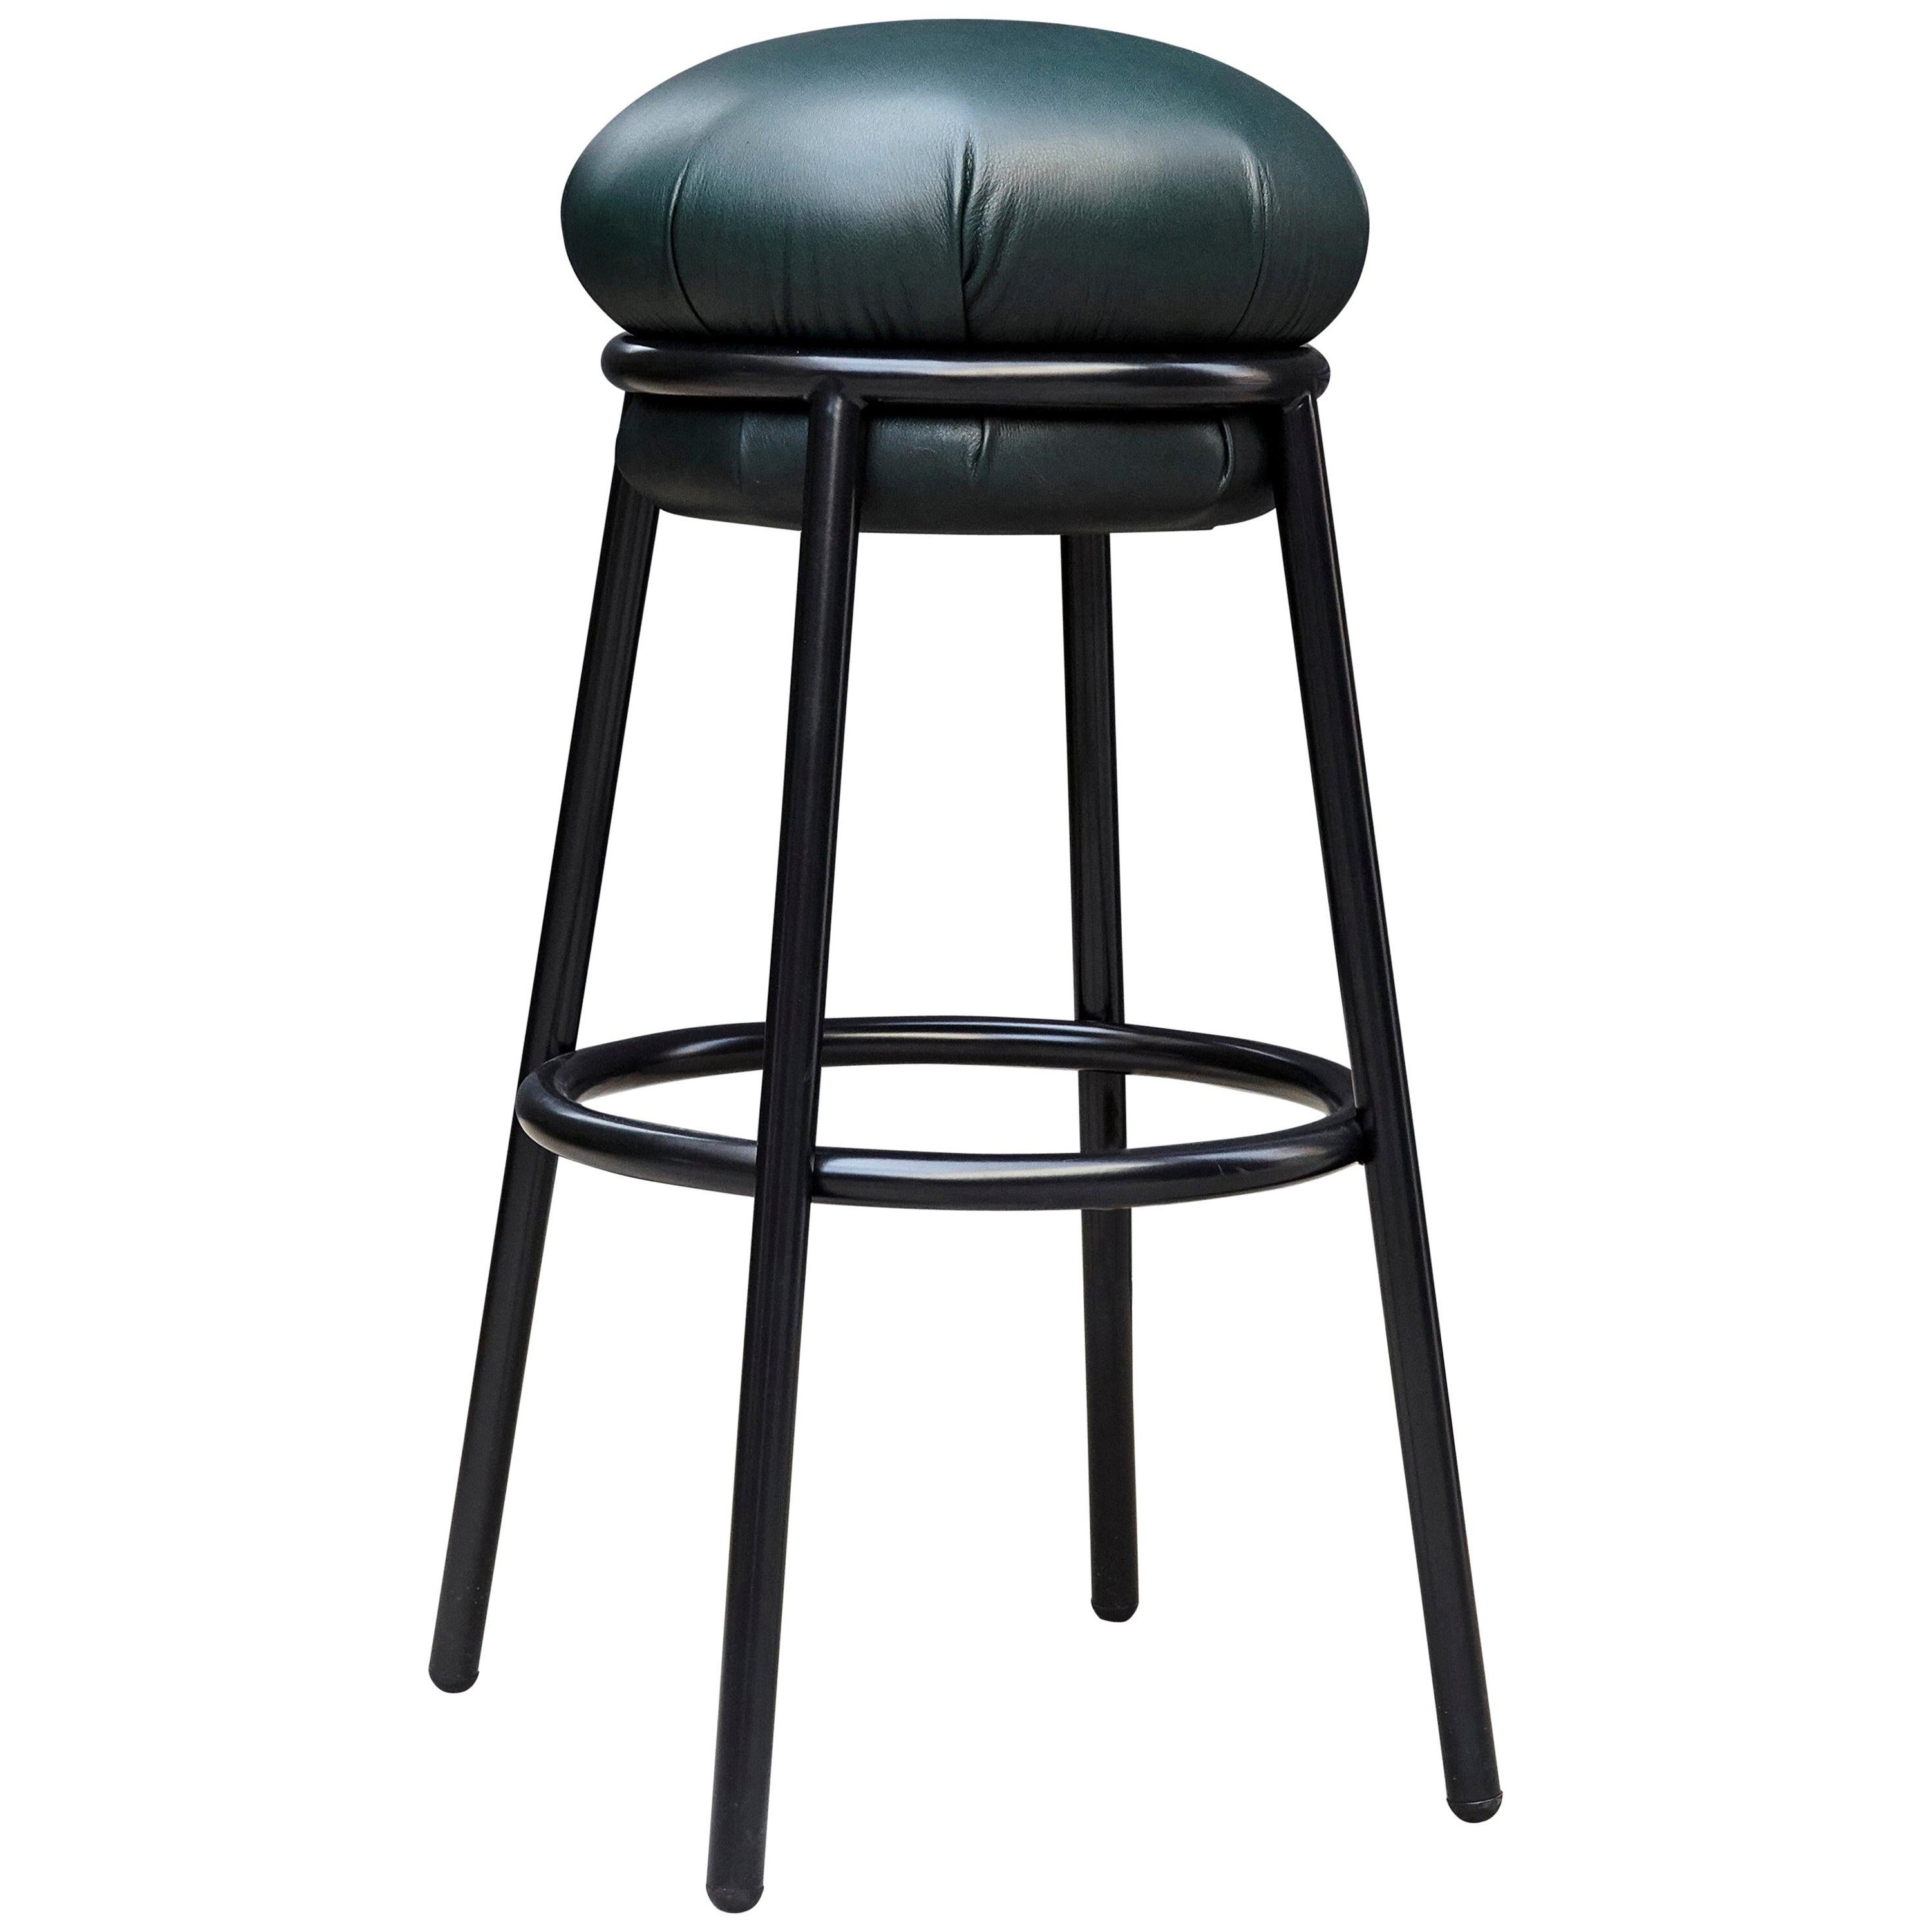 Stephen Burks Grasso Green Leather, Black Lacquered Metal Stool For Sale